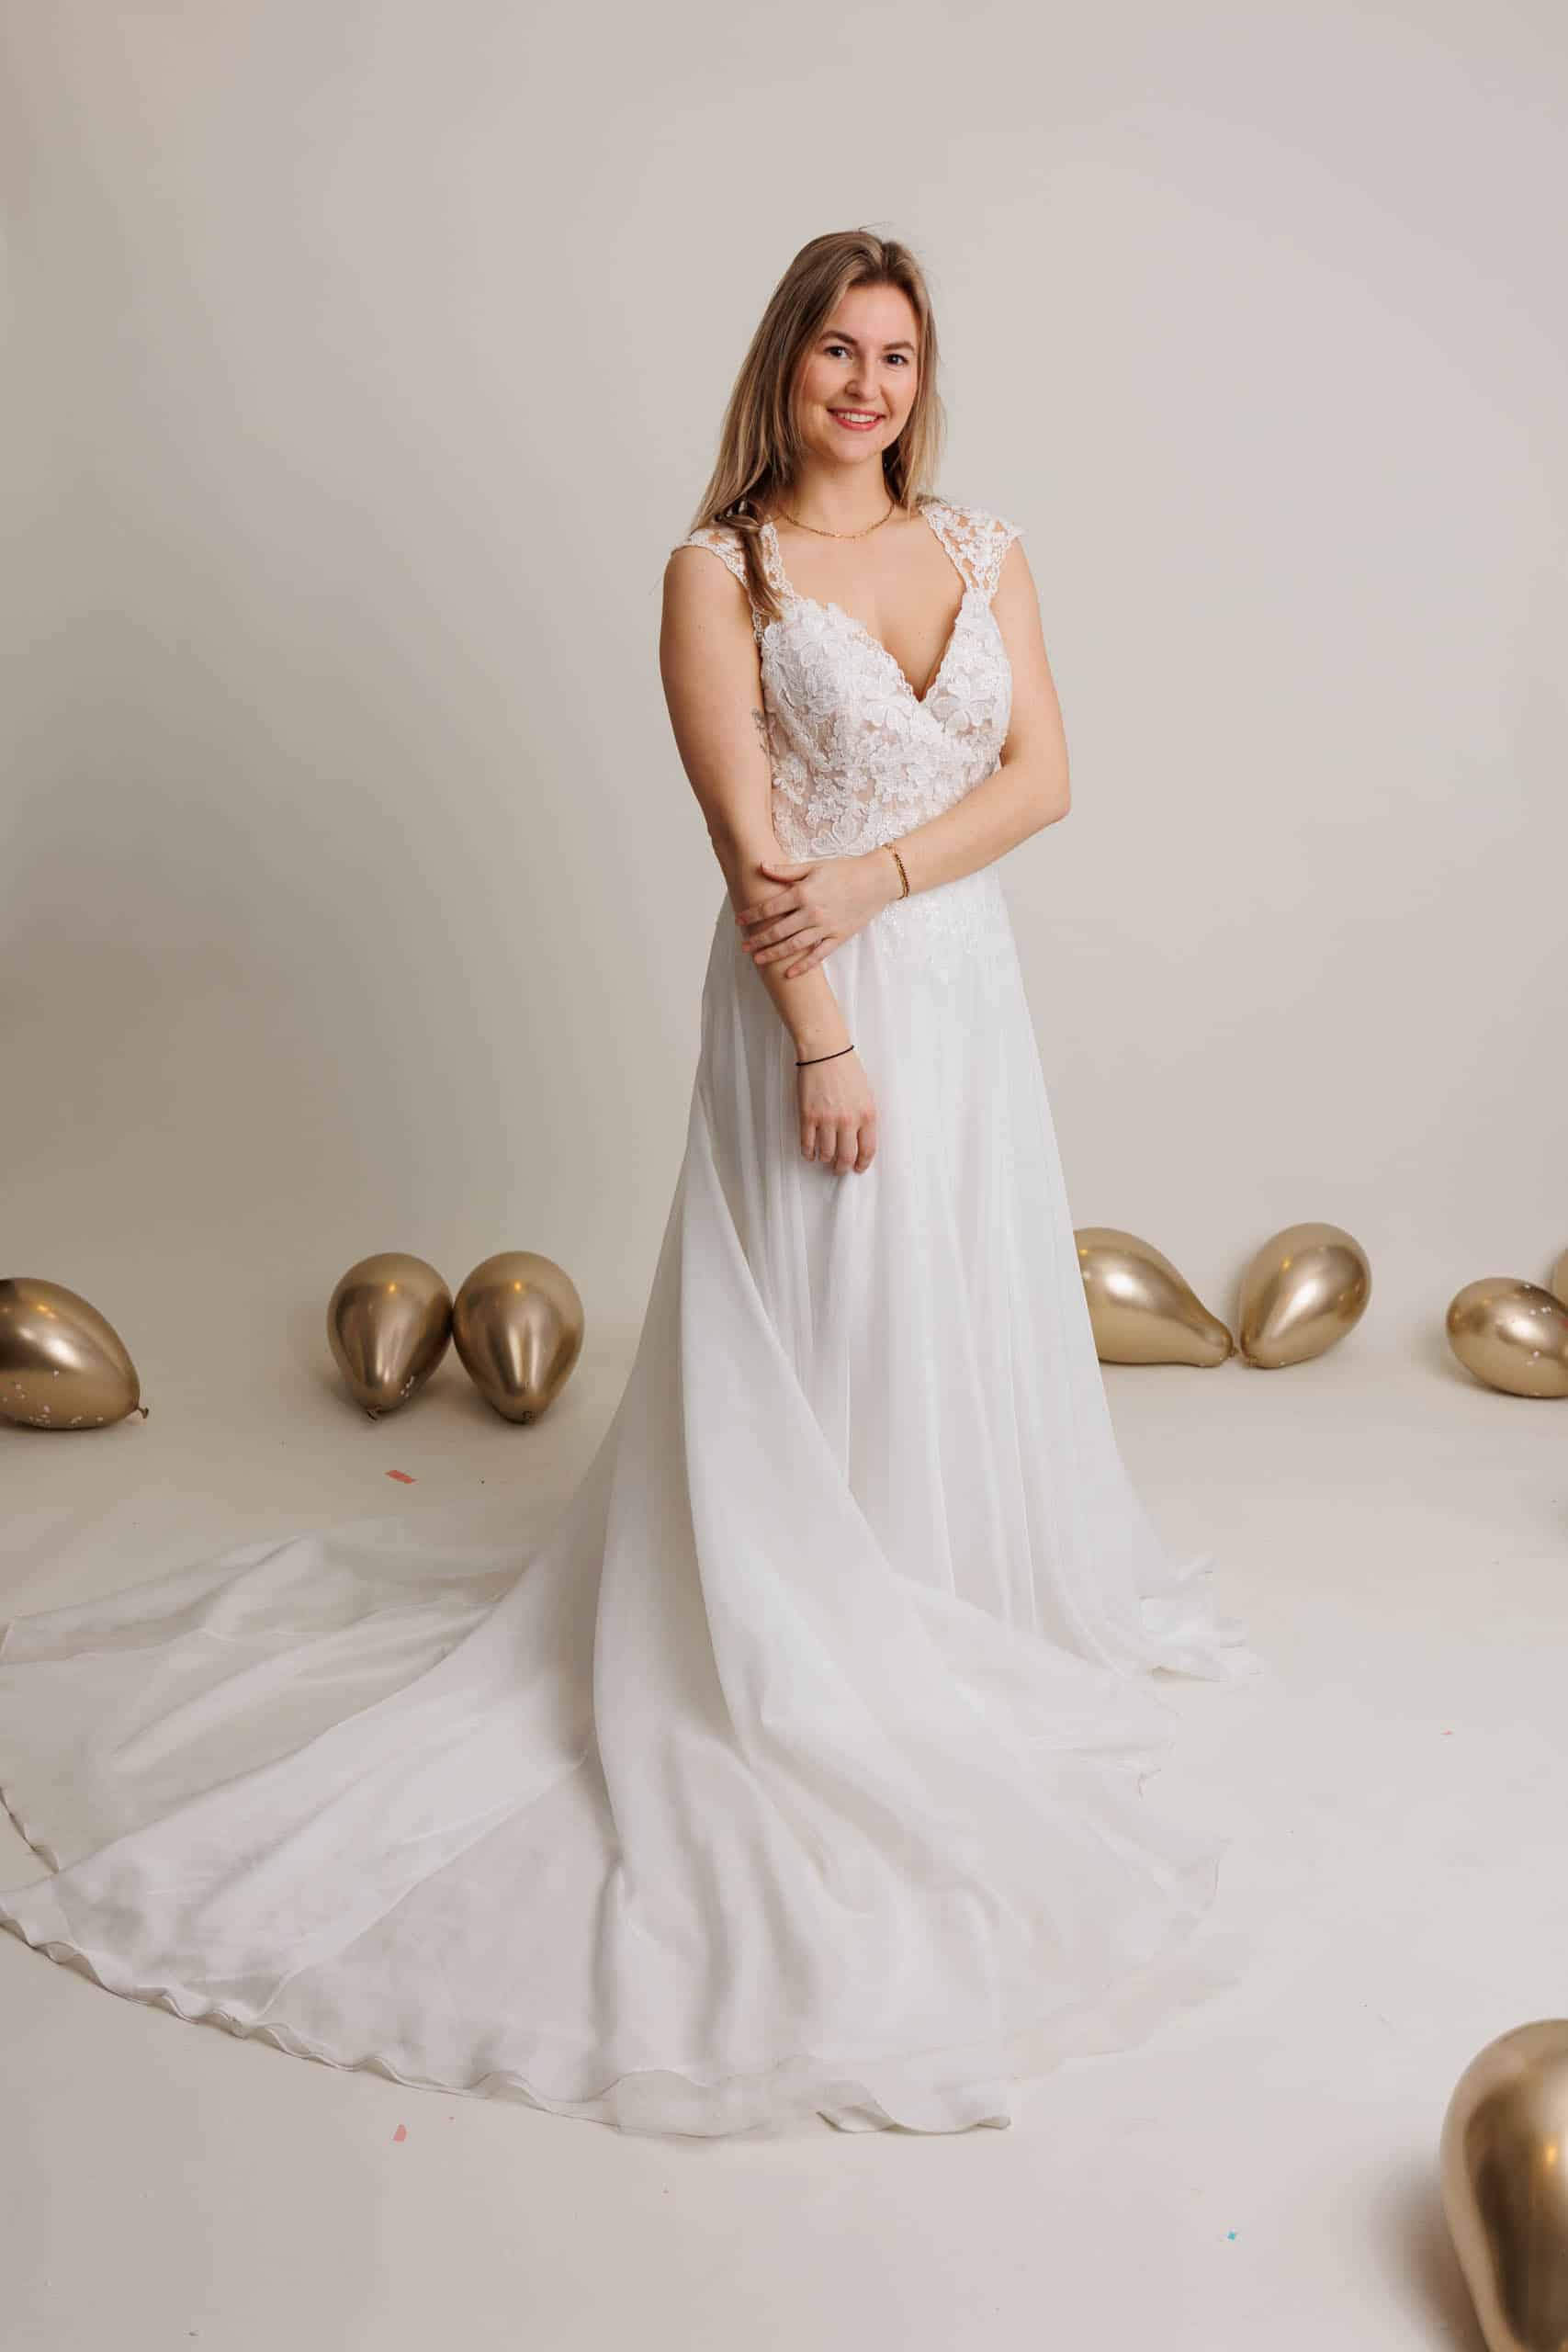 A woman in a white wedding dress poses in front of balloons while trying on wedding dresses for fun.